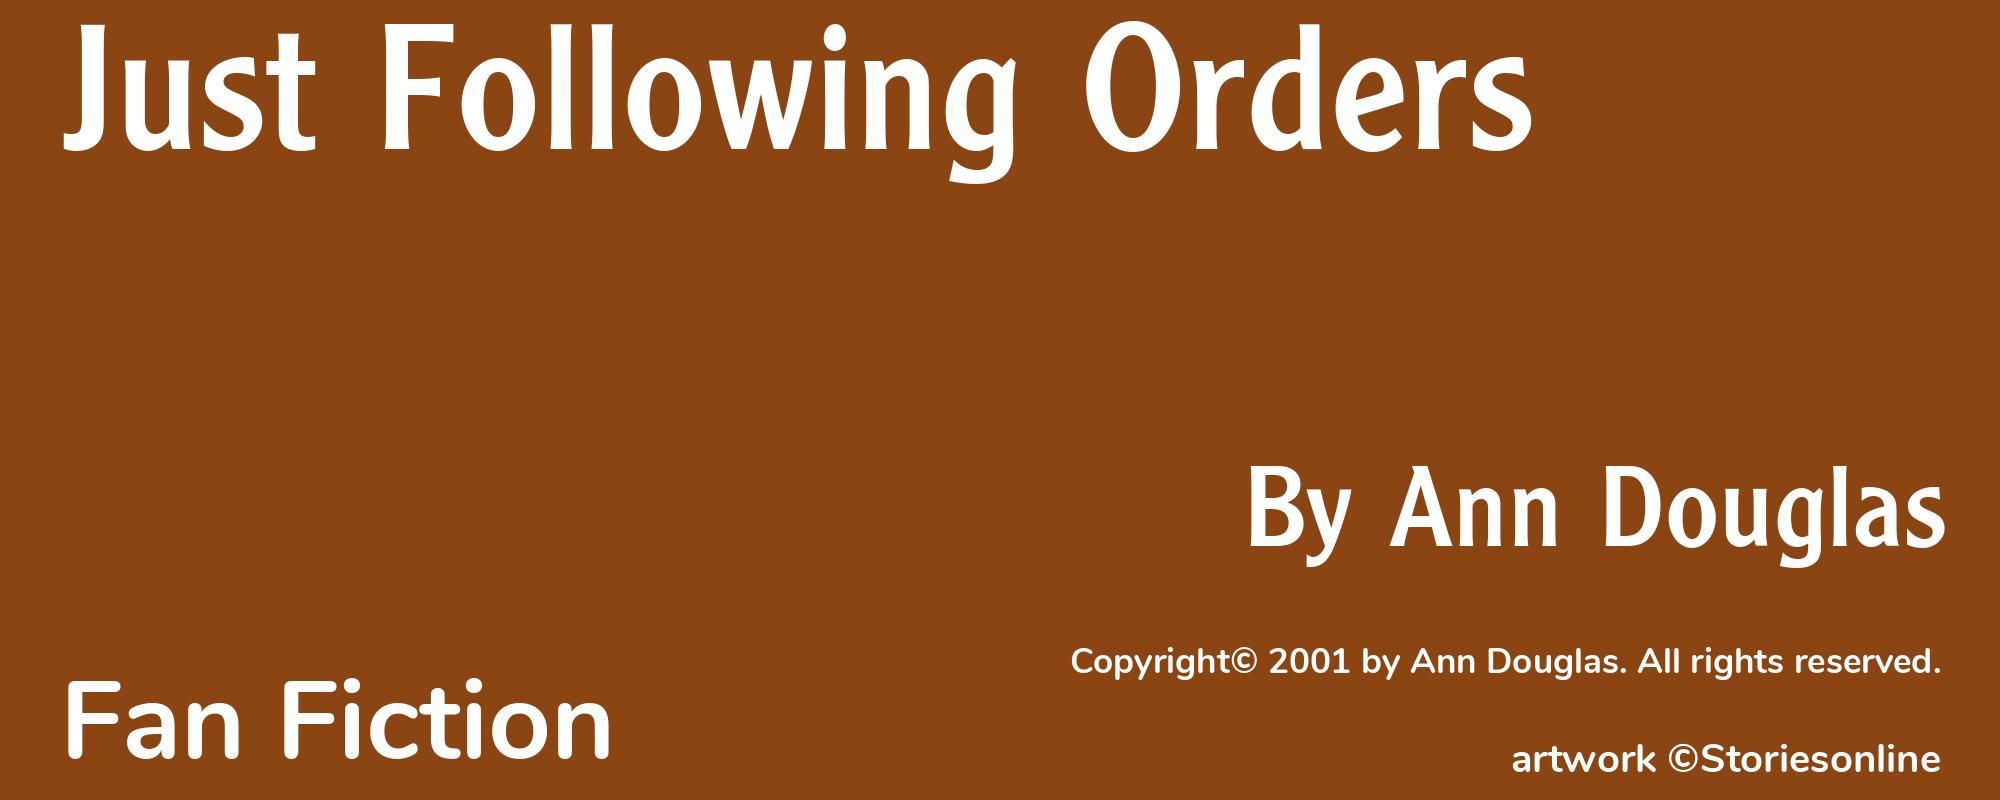 Just Following Orders - Cover